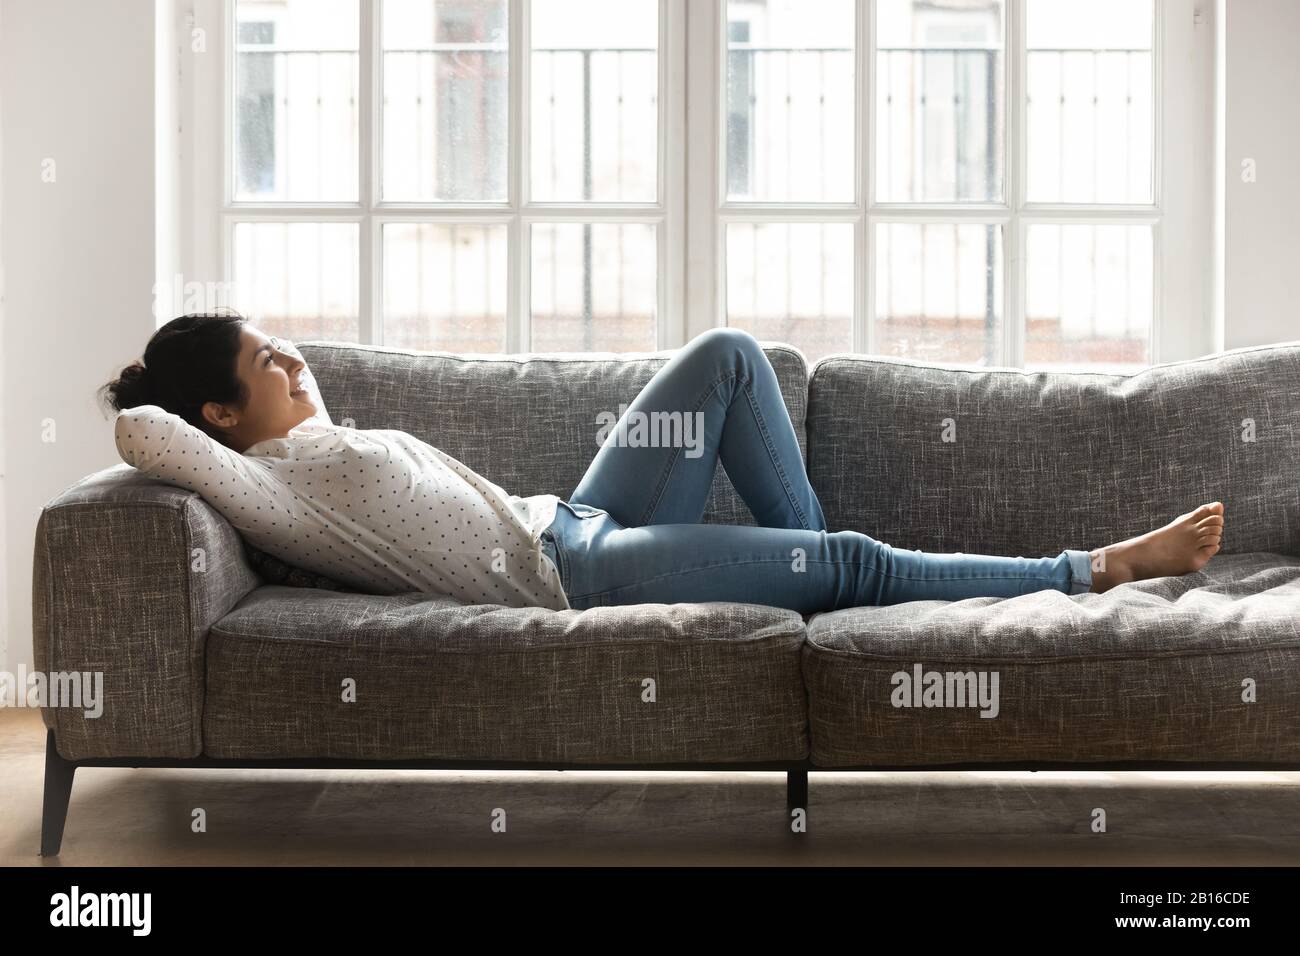 Woman lying on couch putting hands behind head enjoy vacation Stock Photo